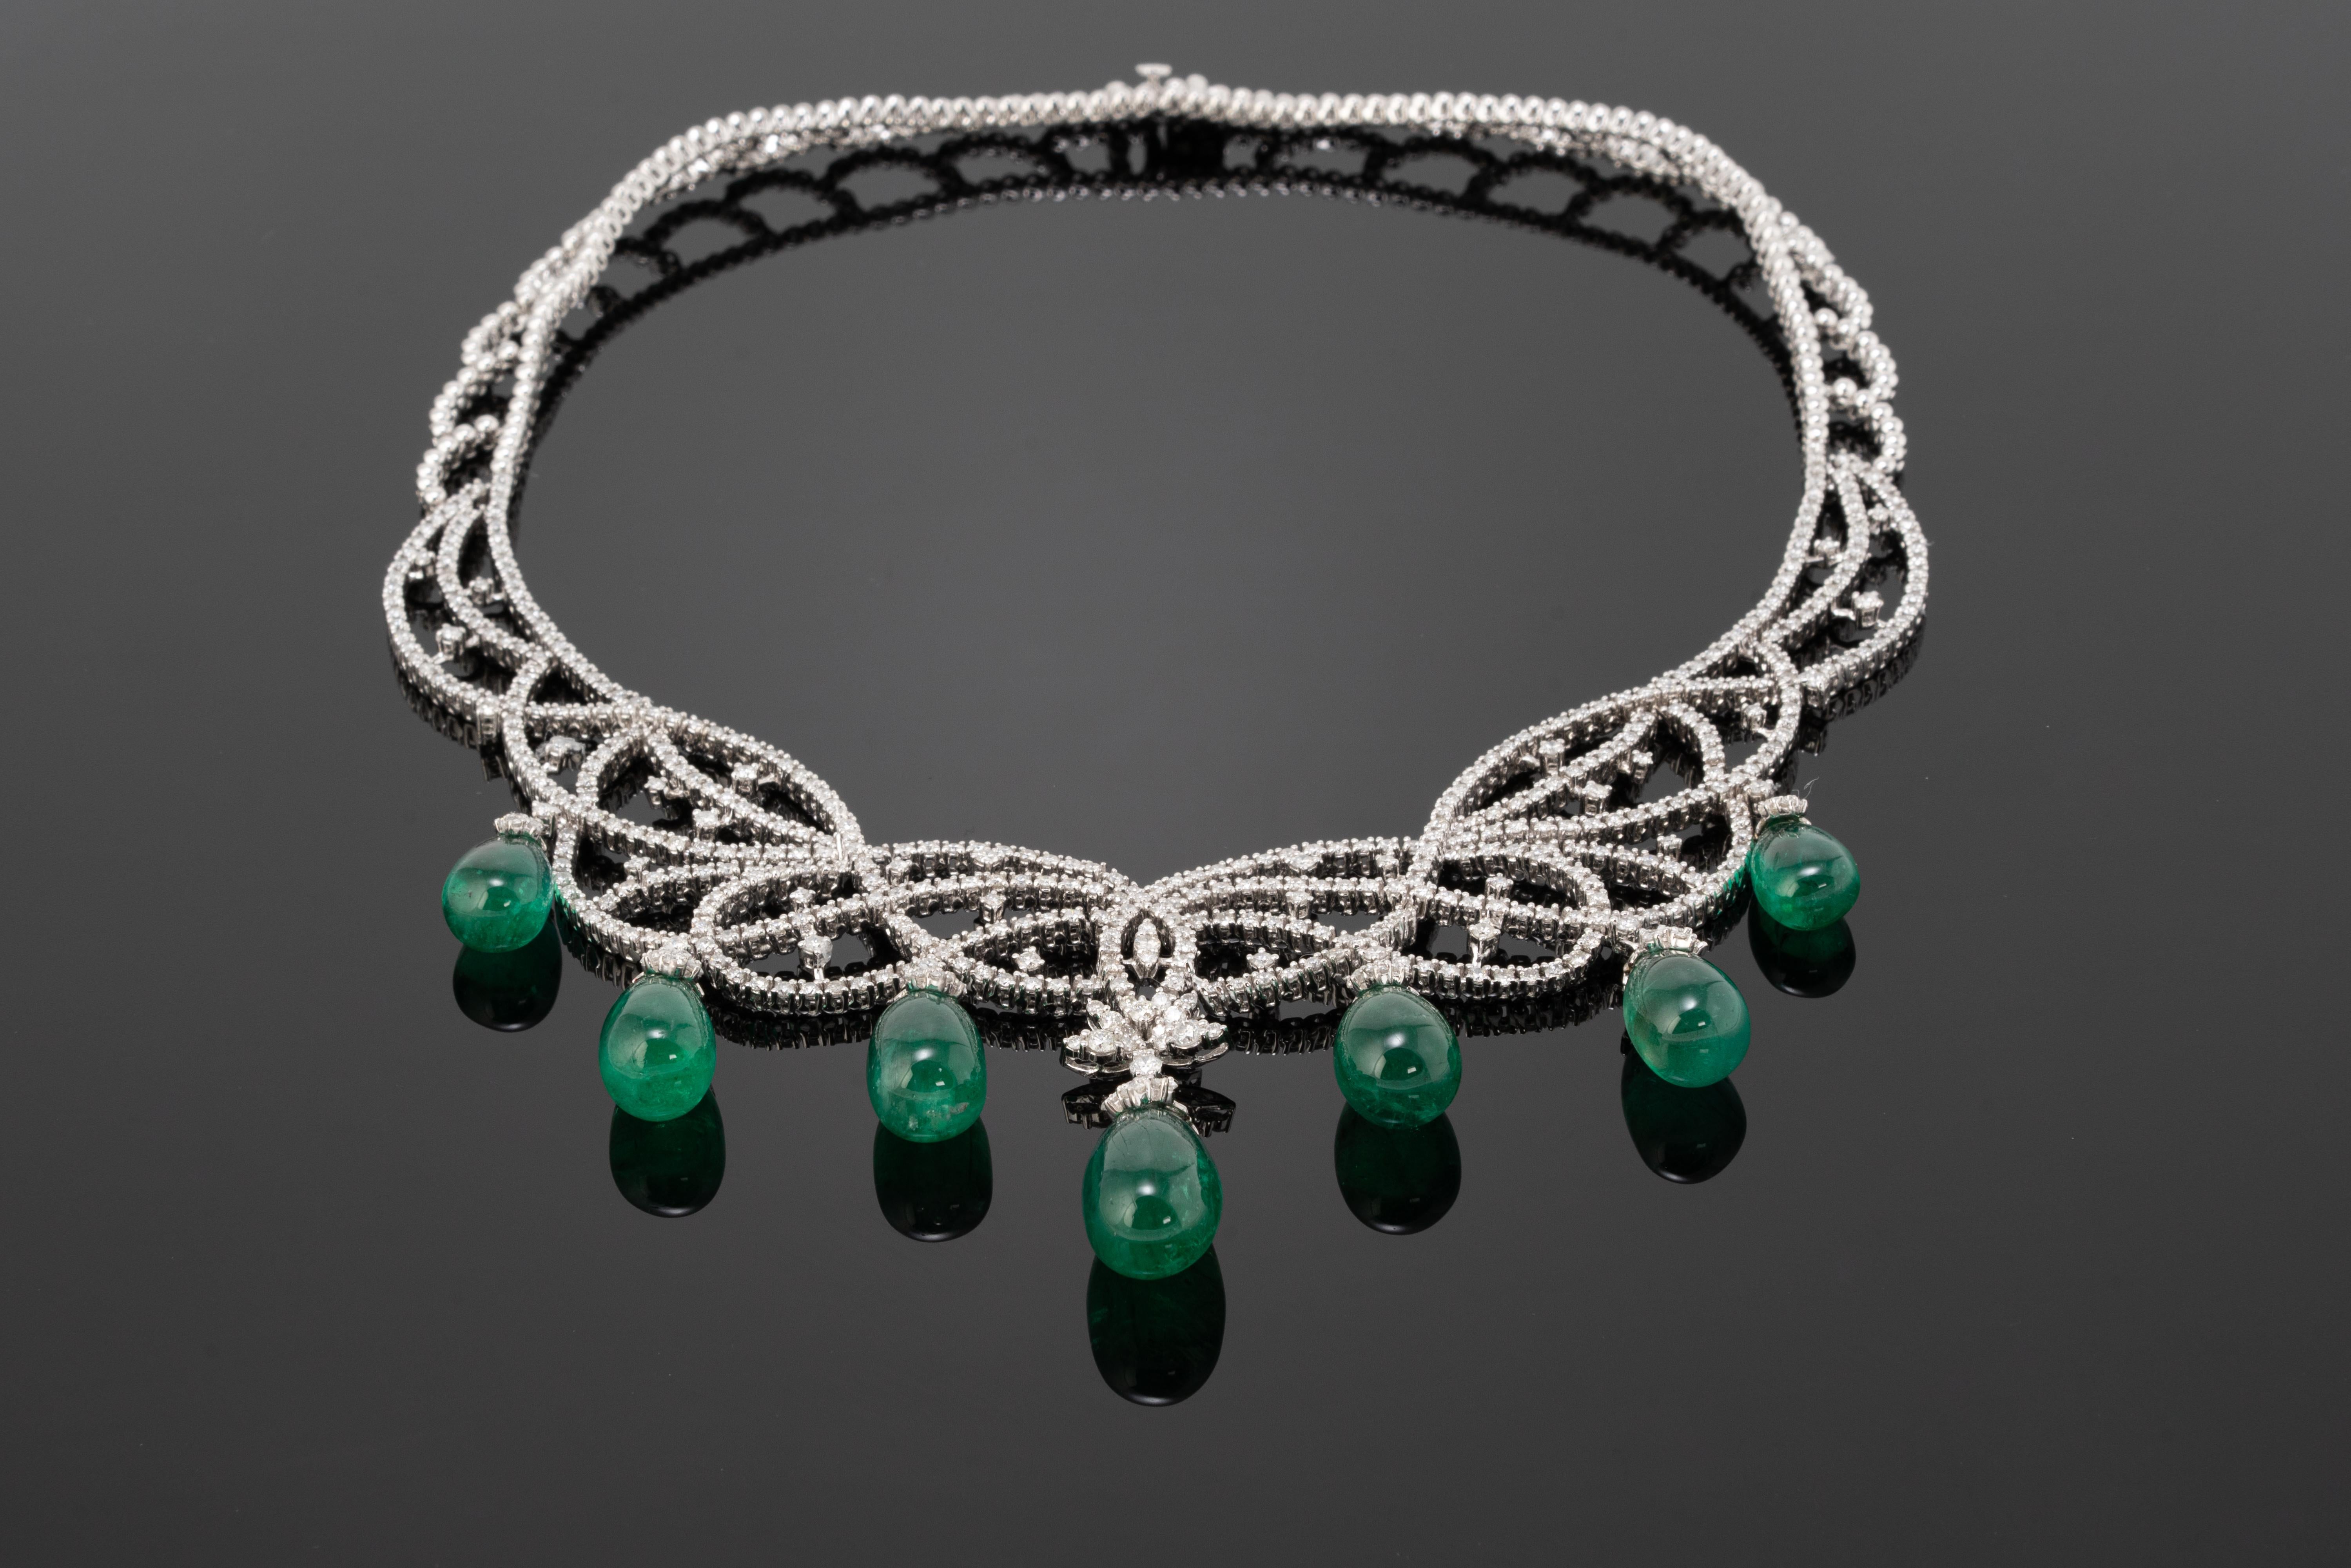 A stunning, one of a kind, natural 81.90 carat Zambian Emerald and Diamond Necklace, flexible so it sits well on all types of necks. The Emeralds are of very high quality, transparent with great lustre and colour, and the Diamonds are of VS/SI